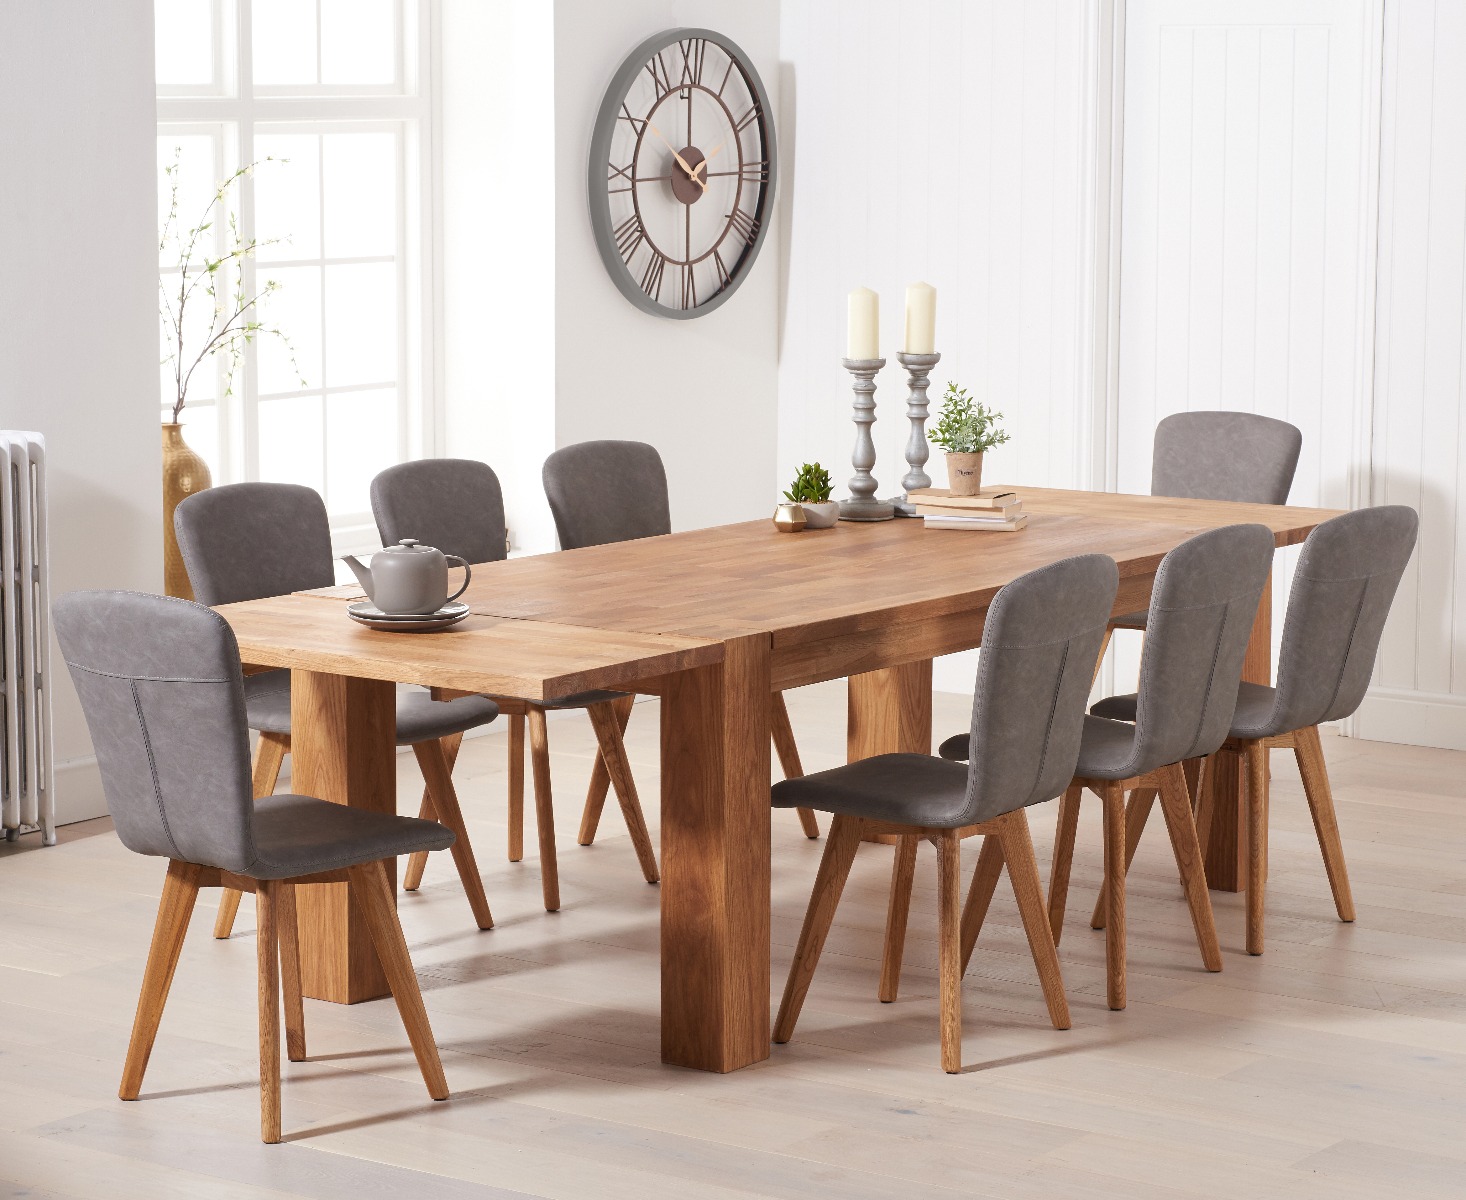 Extending Sheringham 200cm Solid Oak Table With 10 Grey Ruben Faux Leather Chairs